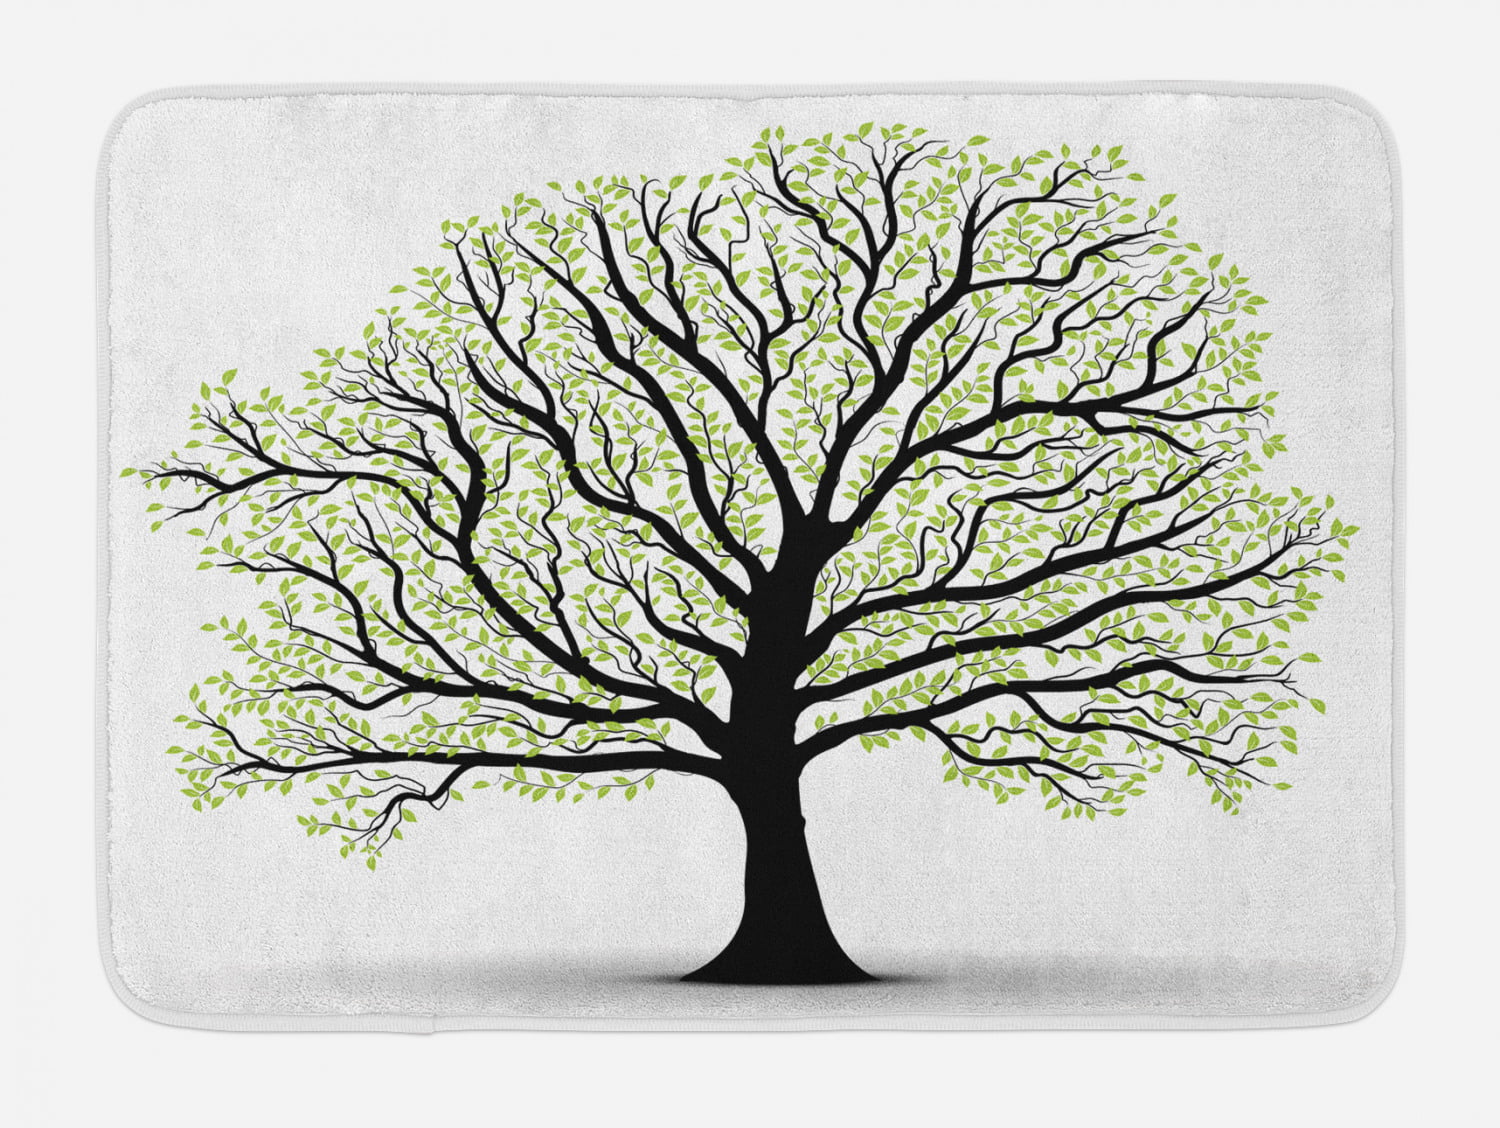 Plush Bathroom Decor Mat with Non Slip Backing 29.5 X 17.5 Ambesonne Bicycle Bath Mat Autumn Tree with an Aged Old Bike and Fall Tree of The November Day Fall Season a Park Nature Theme Orange